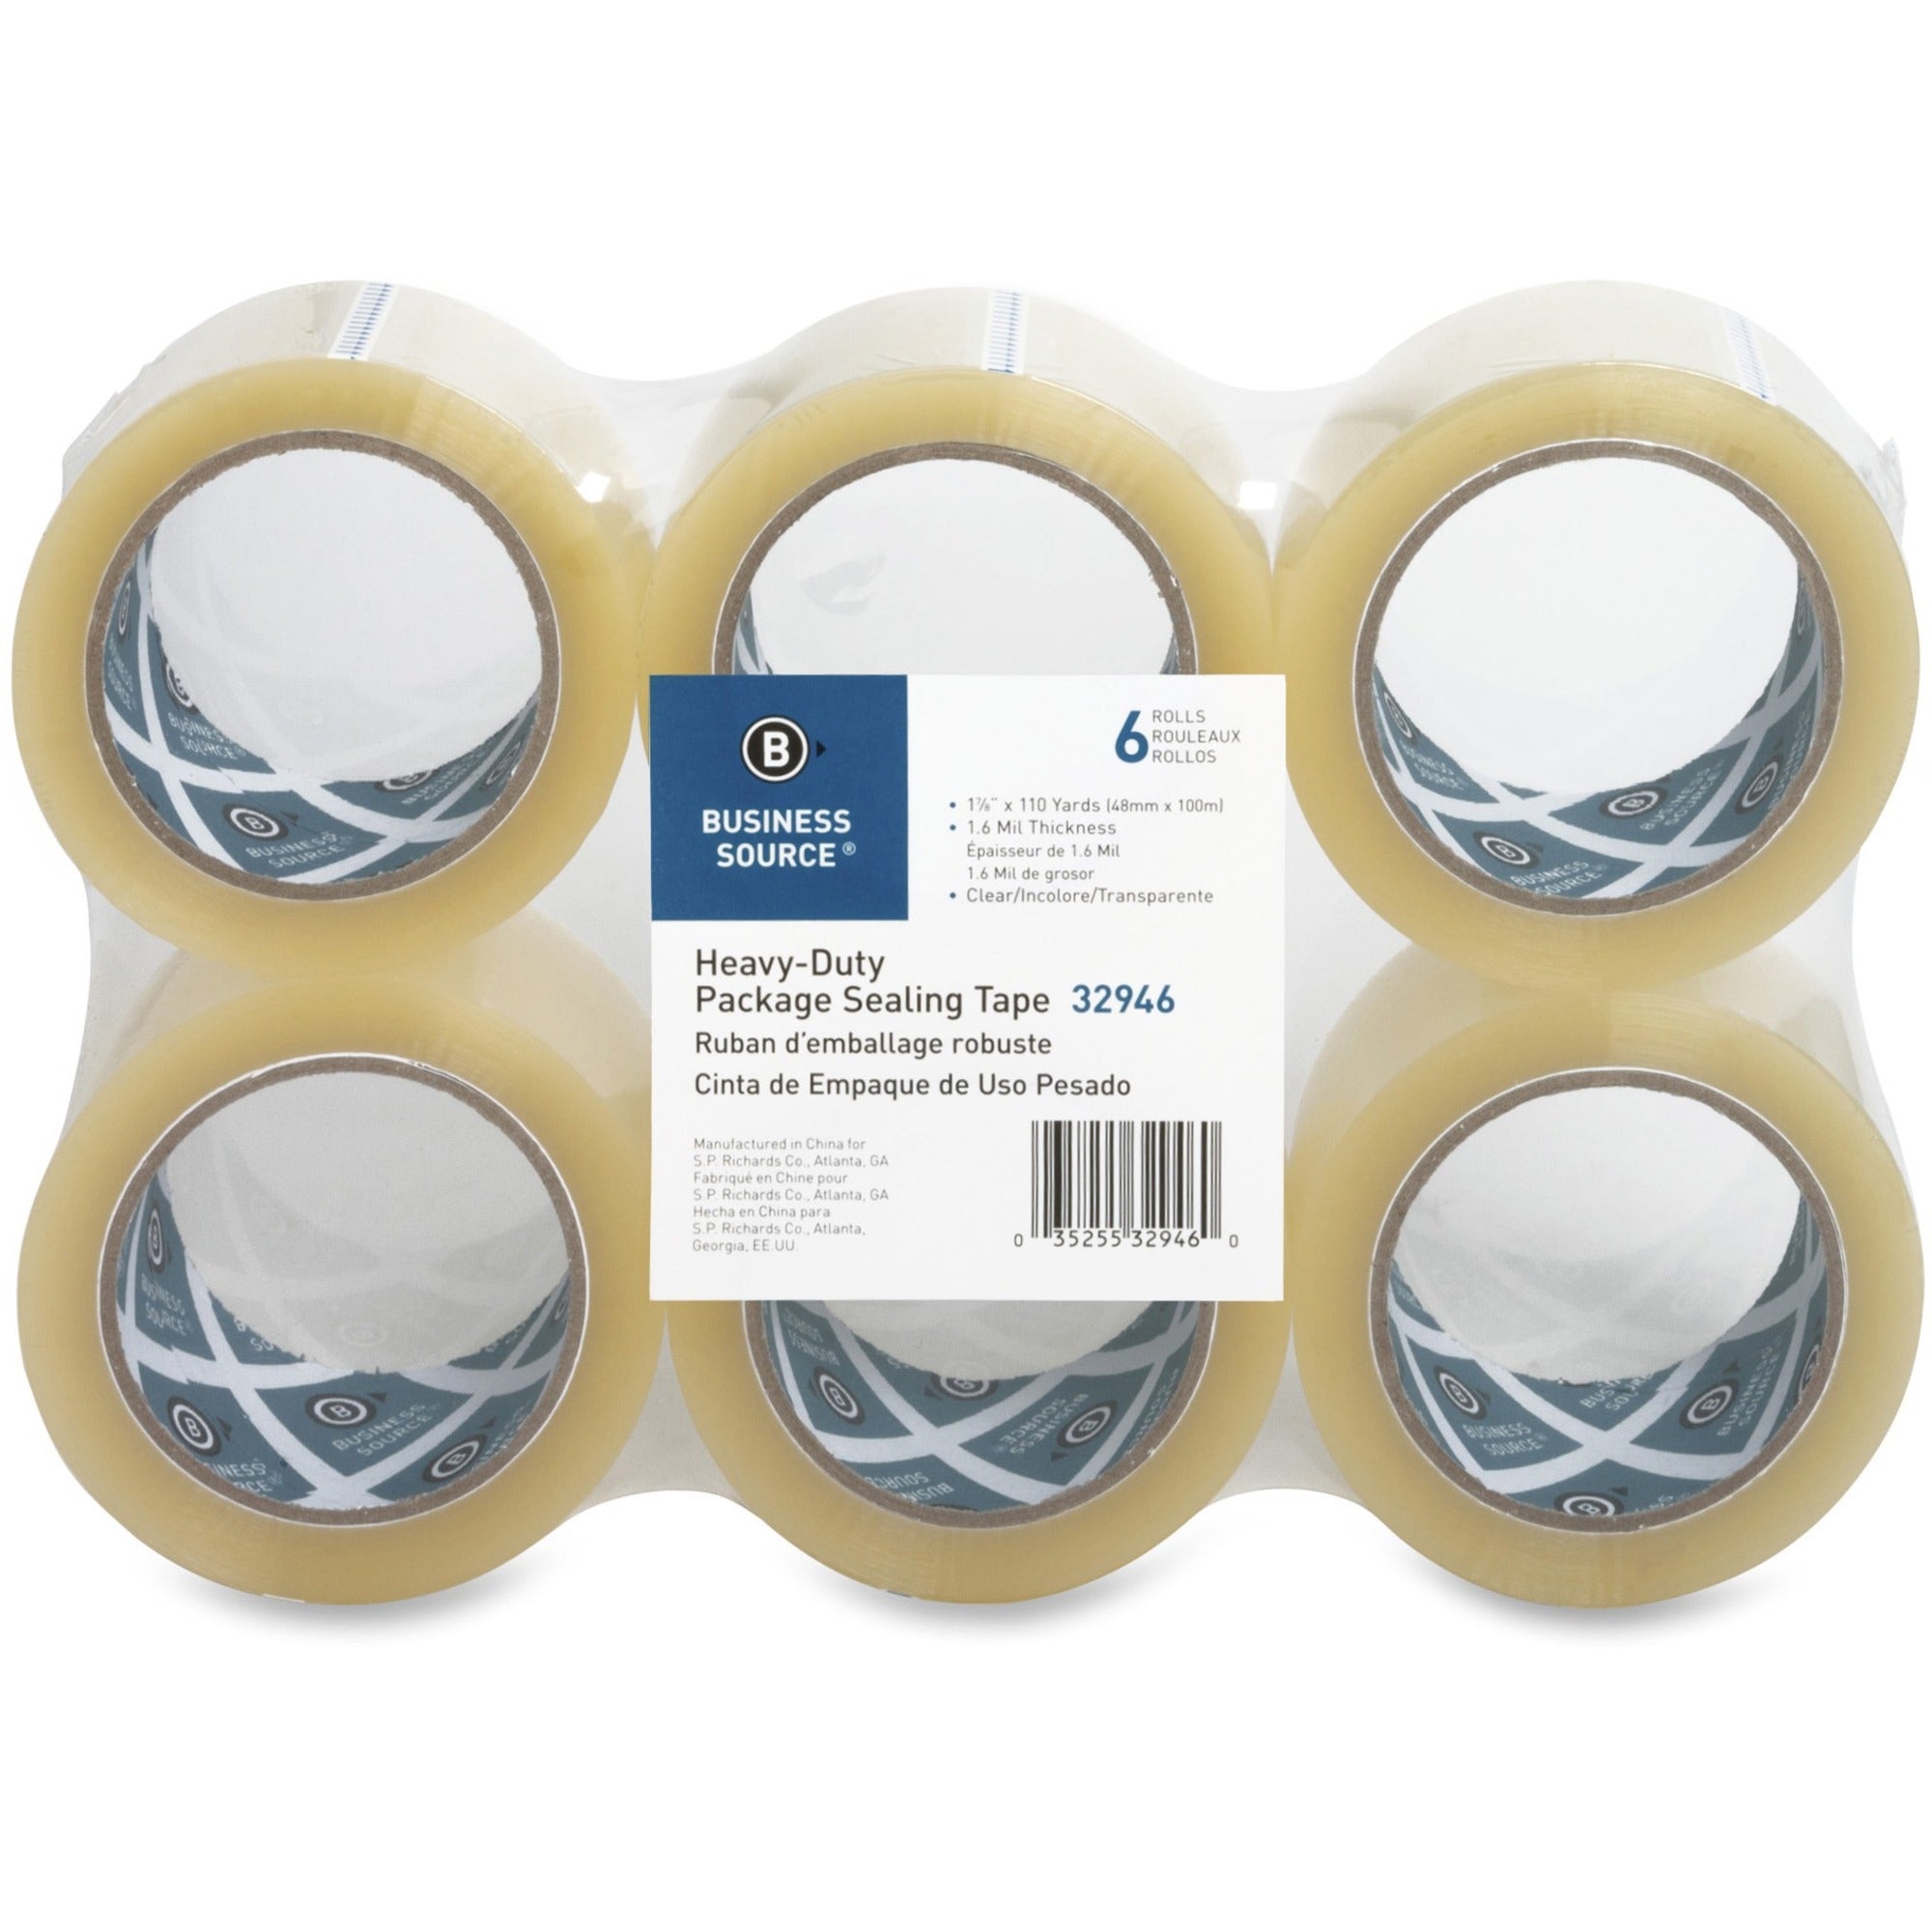 Business Source Heavy-duty Packaging/Sealing Tape - 110 yd Length x 1.88" Width - 3" Core - 1.60 mil - Breakage Resistance - For Bonding, Packing - 6 / Pack - Clear - 